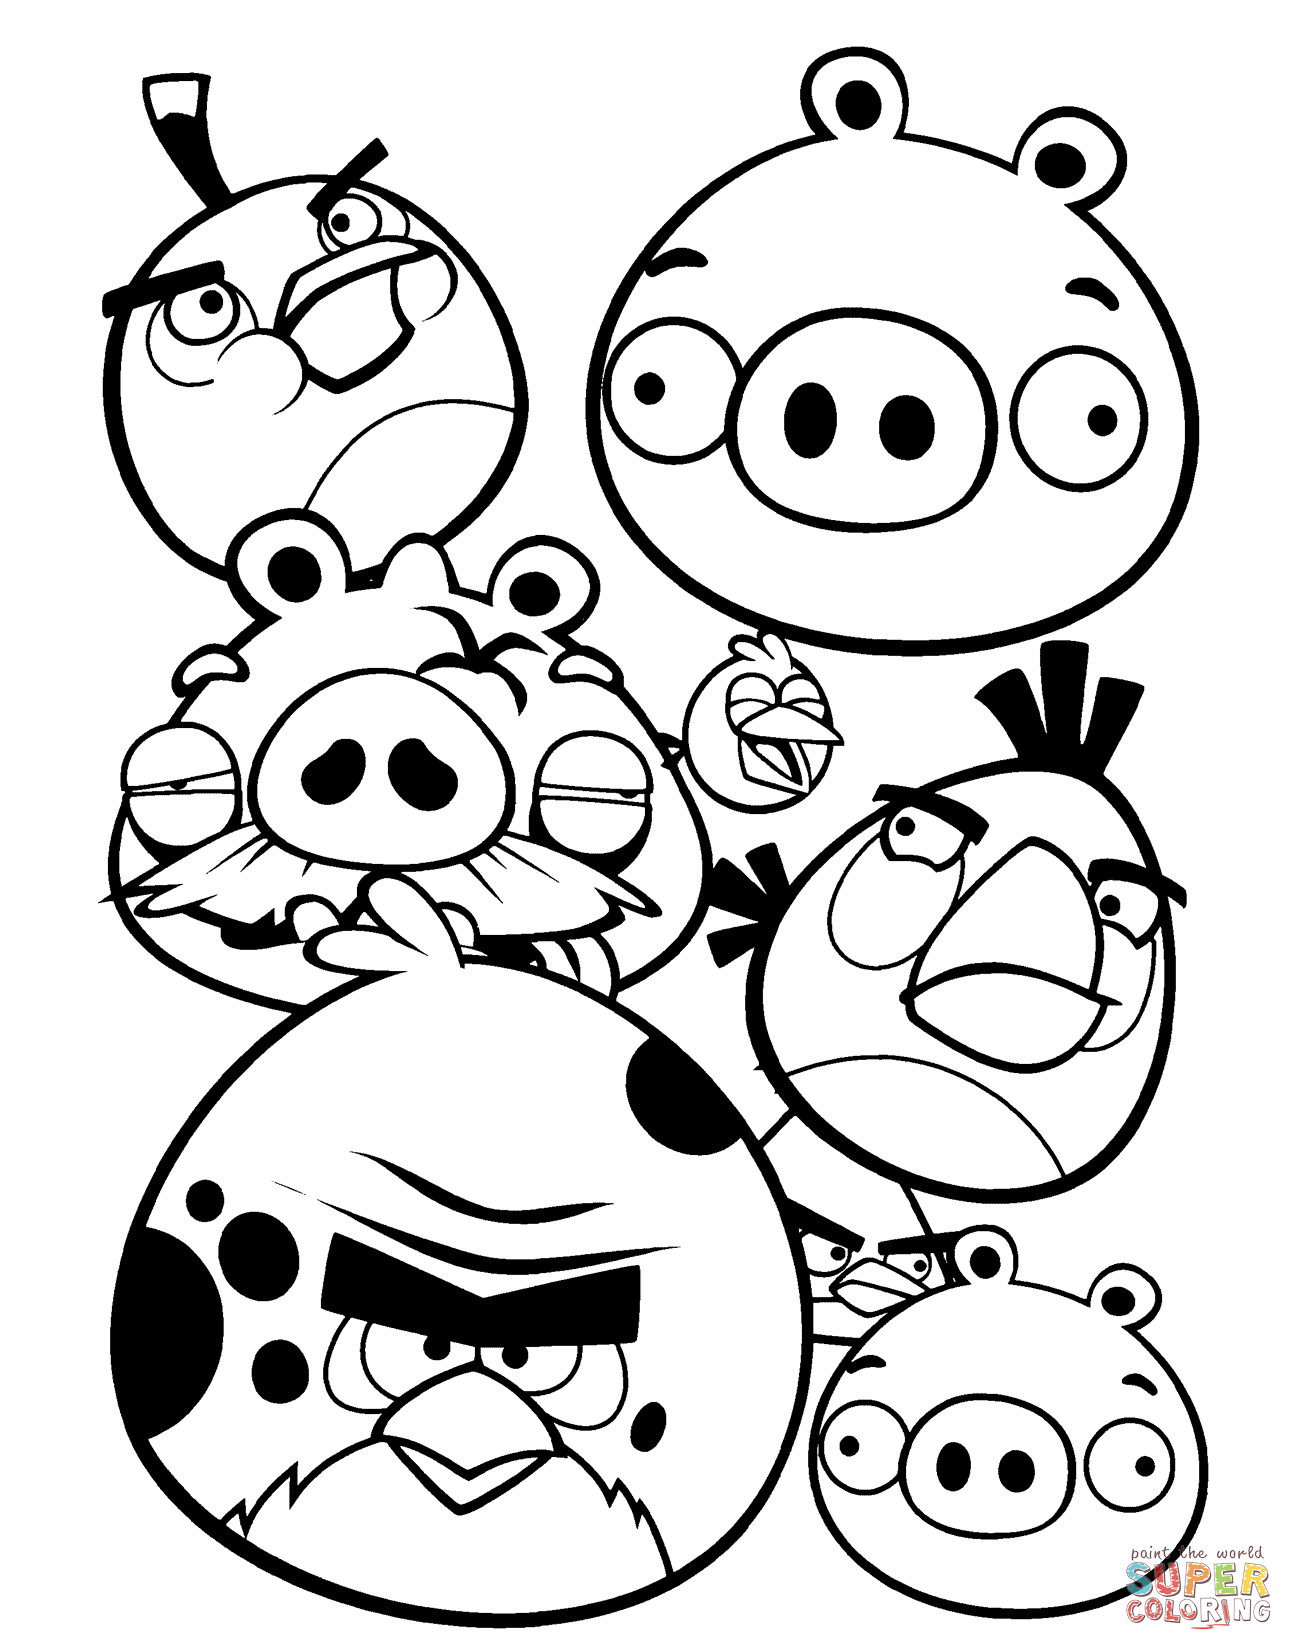 Angry Birds Coloring Pages
 Angry Birds coloring page